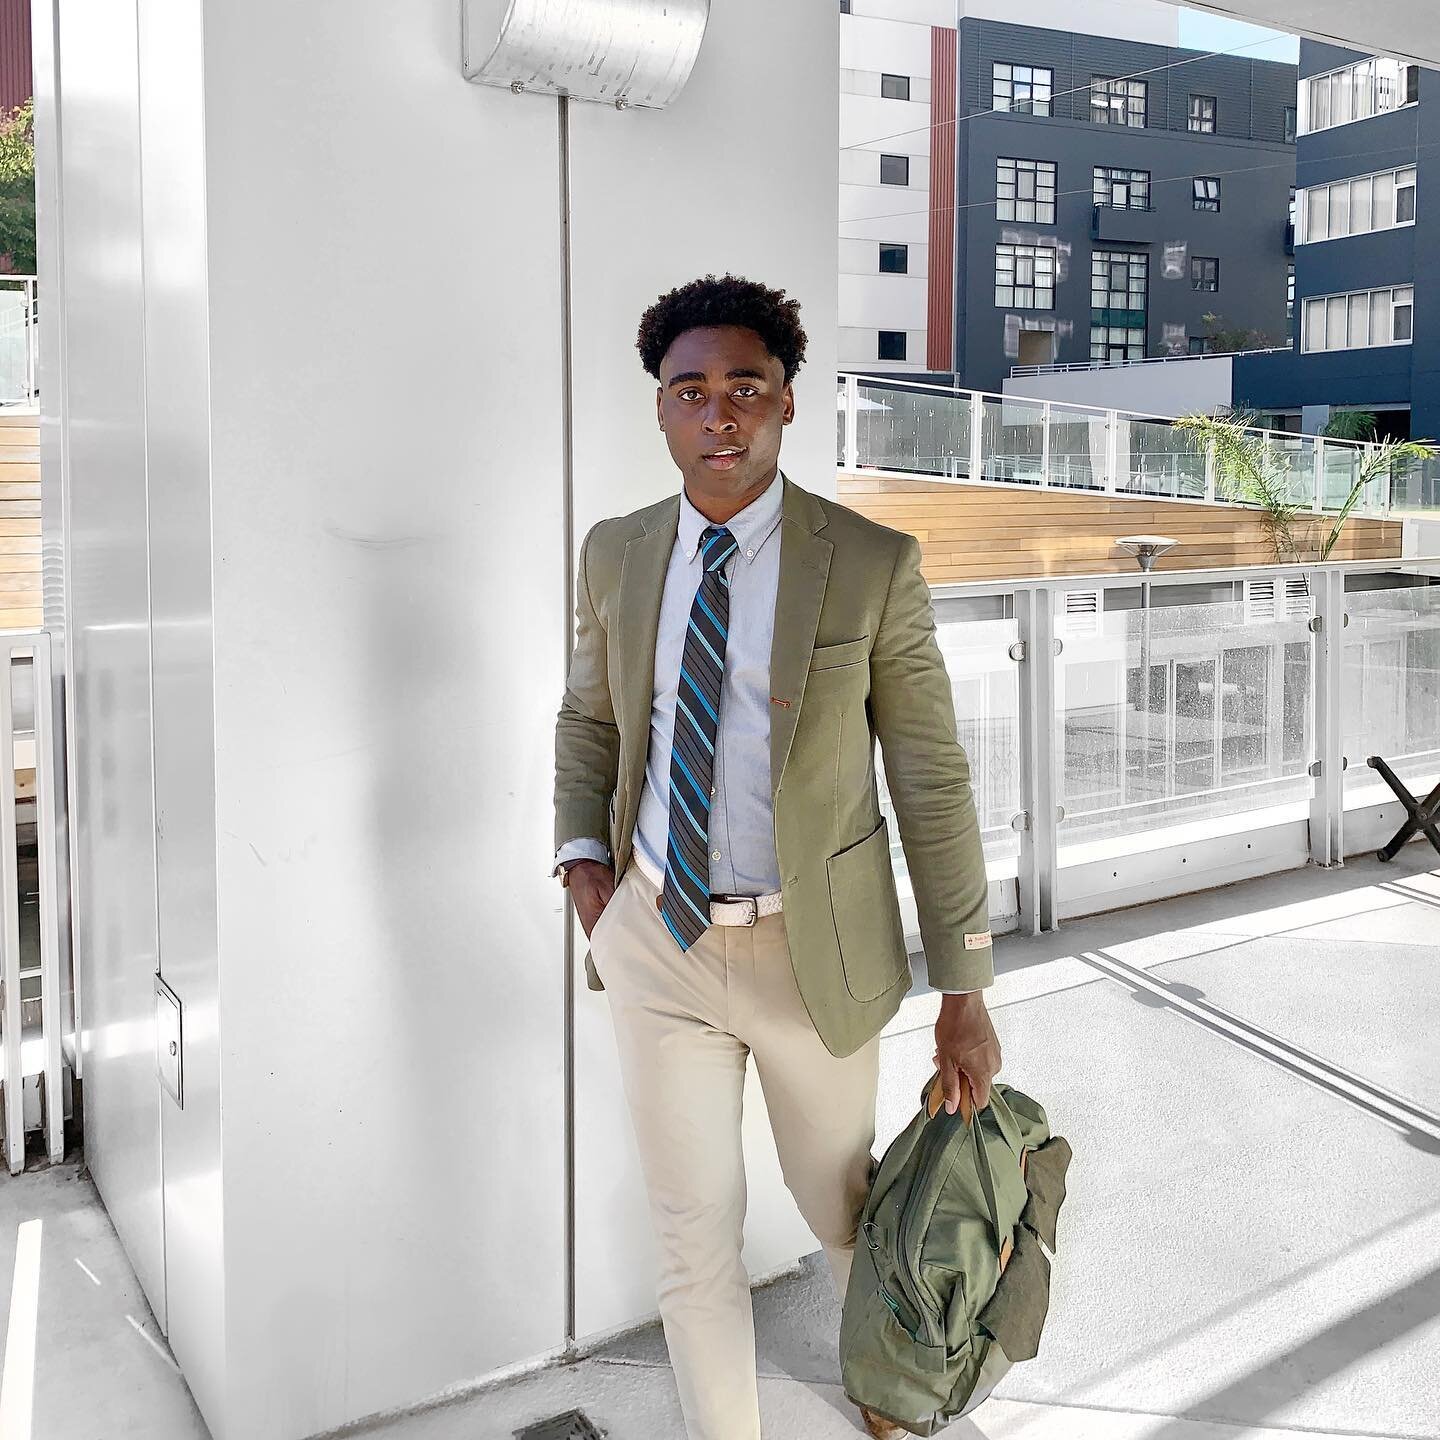 Happy Friday! Looking fall appropriate rocking this lovely Twill Sports Blazer from @redfleece  #SparksNStyle #RedFleece ⠀⠀⠀⠀⠀⠀⠀⠀⠀⠀⠀⠀ ⠀⠀⠀⠀⠀⠀⠀⠀⠀⠀⠀⠀ ⠀⠀⠀⠀⠀⠀⠀⠀⠀⠀⠀⠀ 

#dapperman #blackmen #brooksbrothers #dtla #4chair #suited